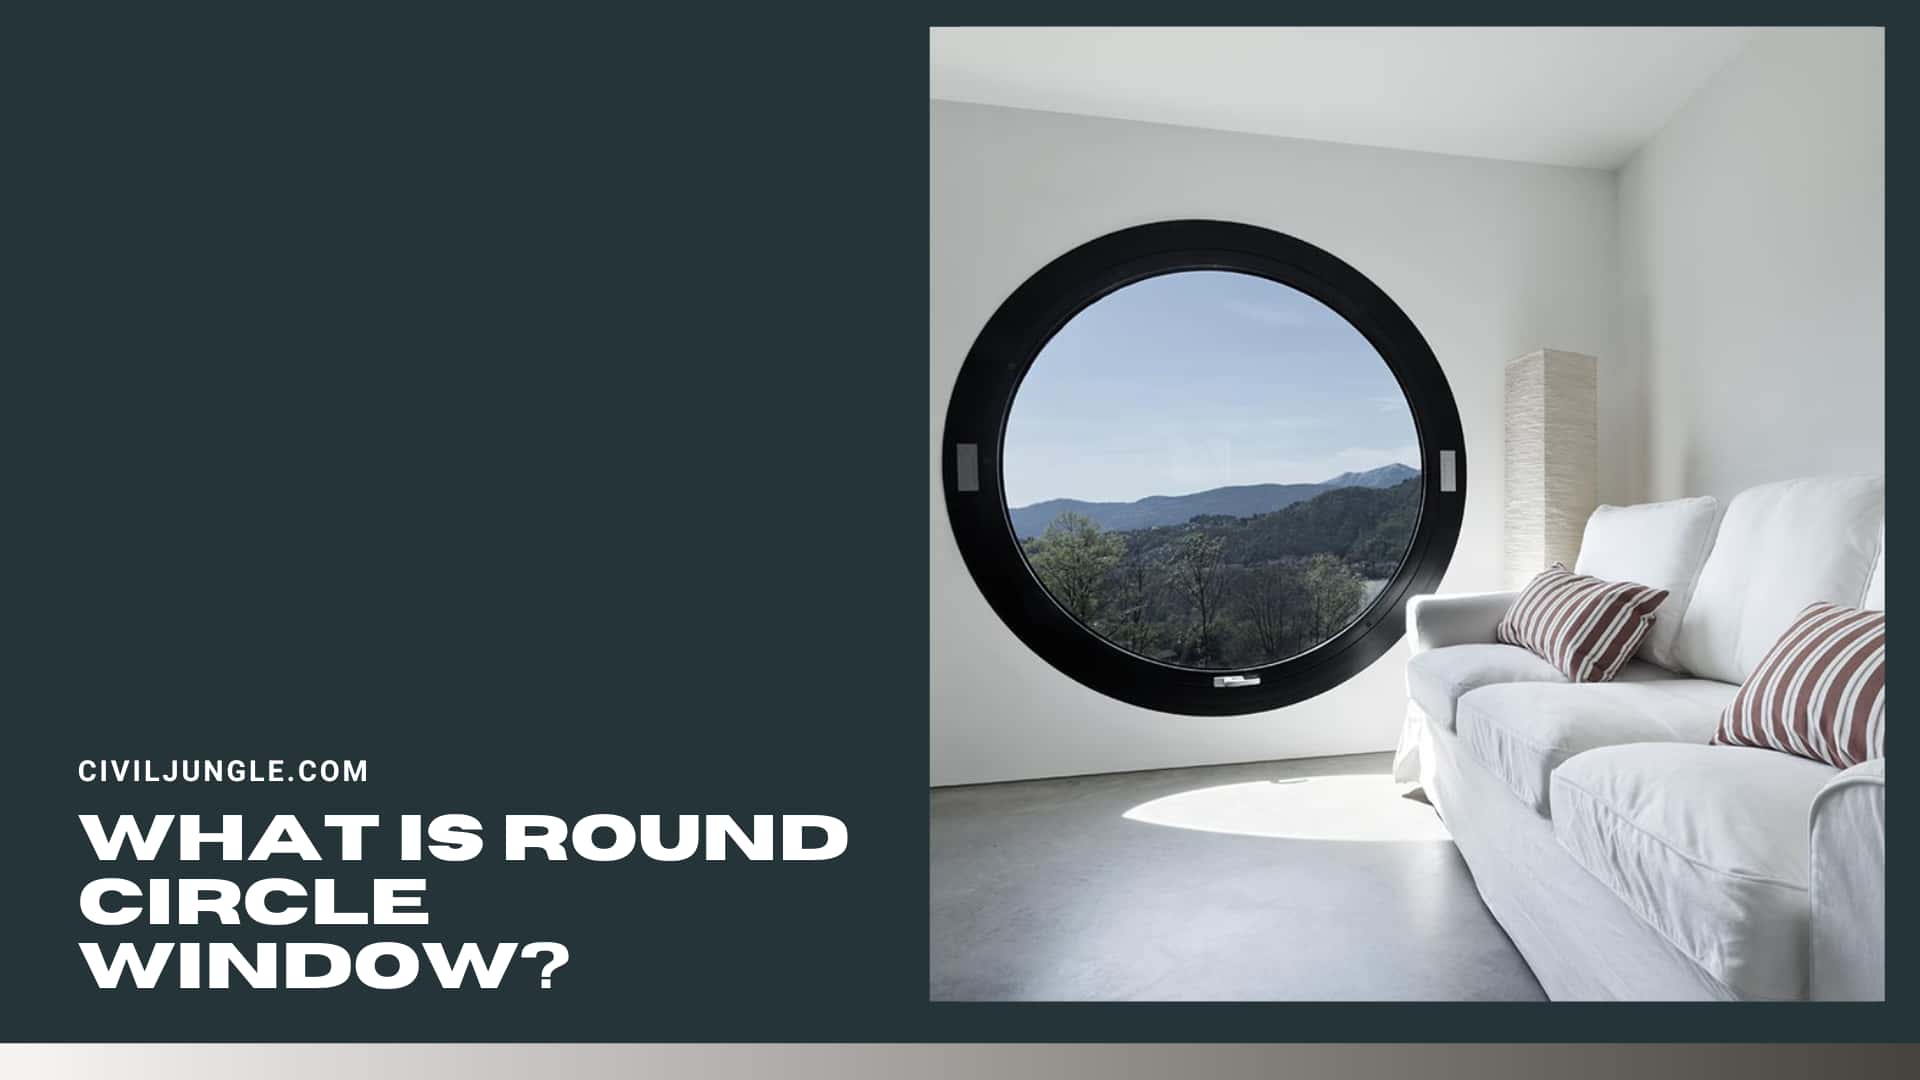 What Is Round Circle Window?